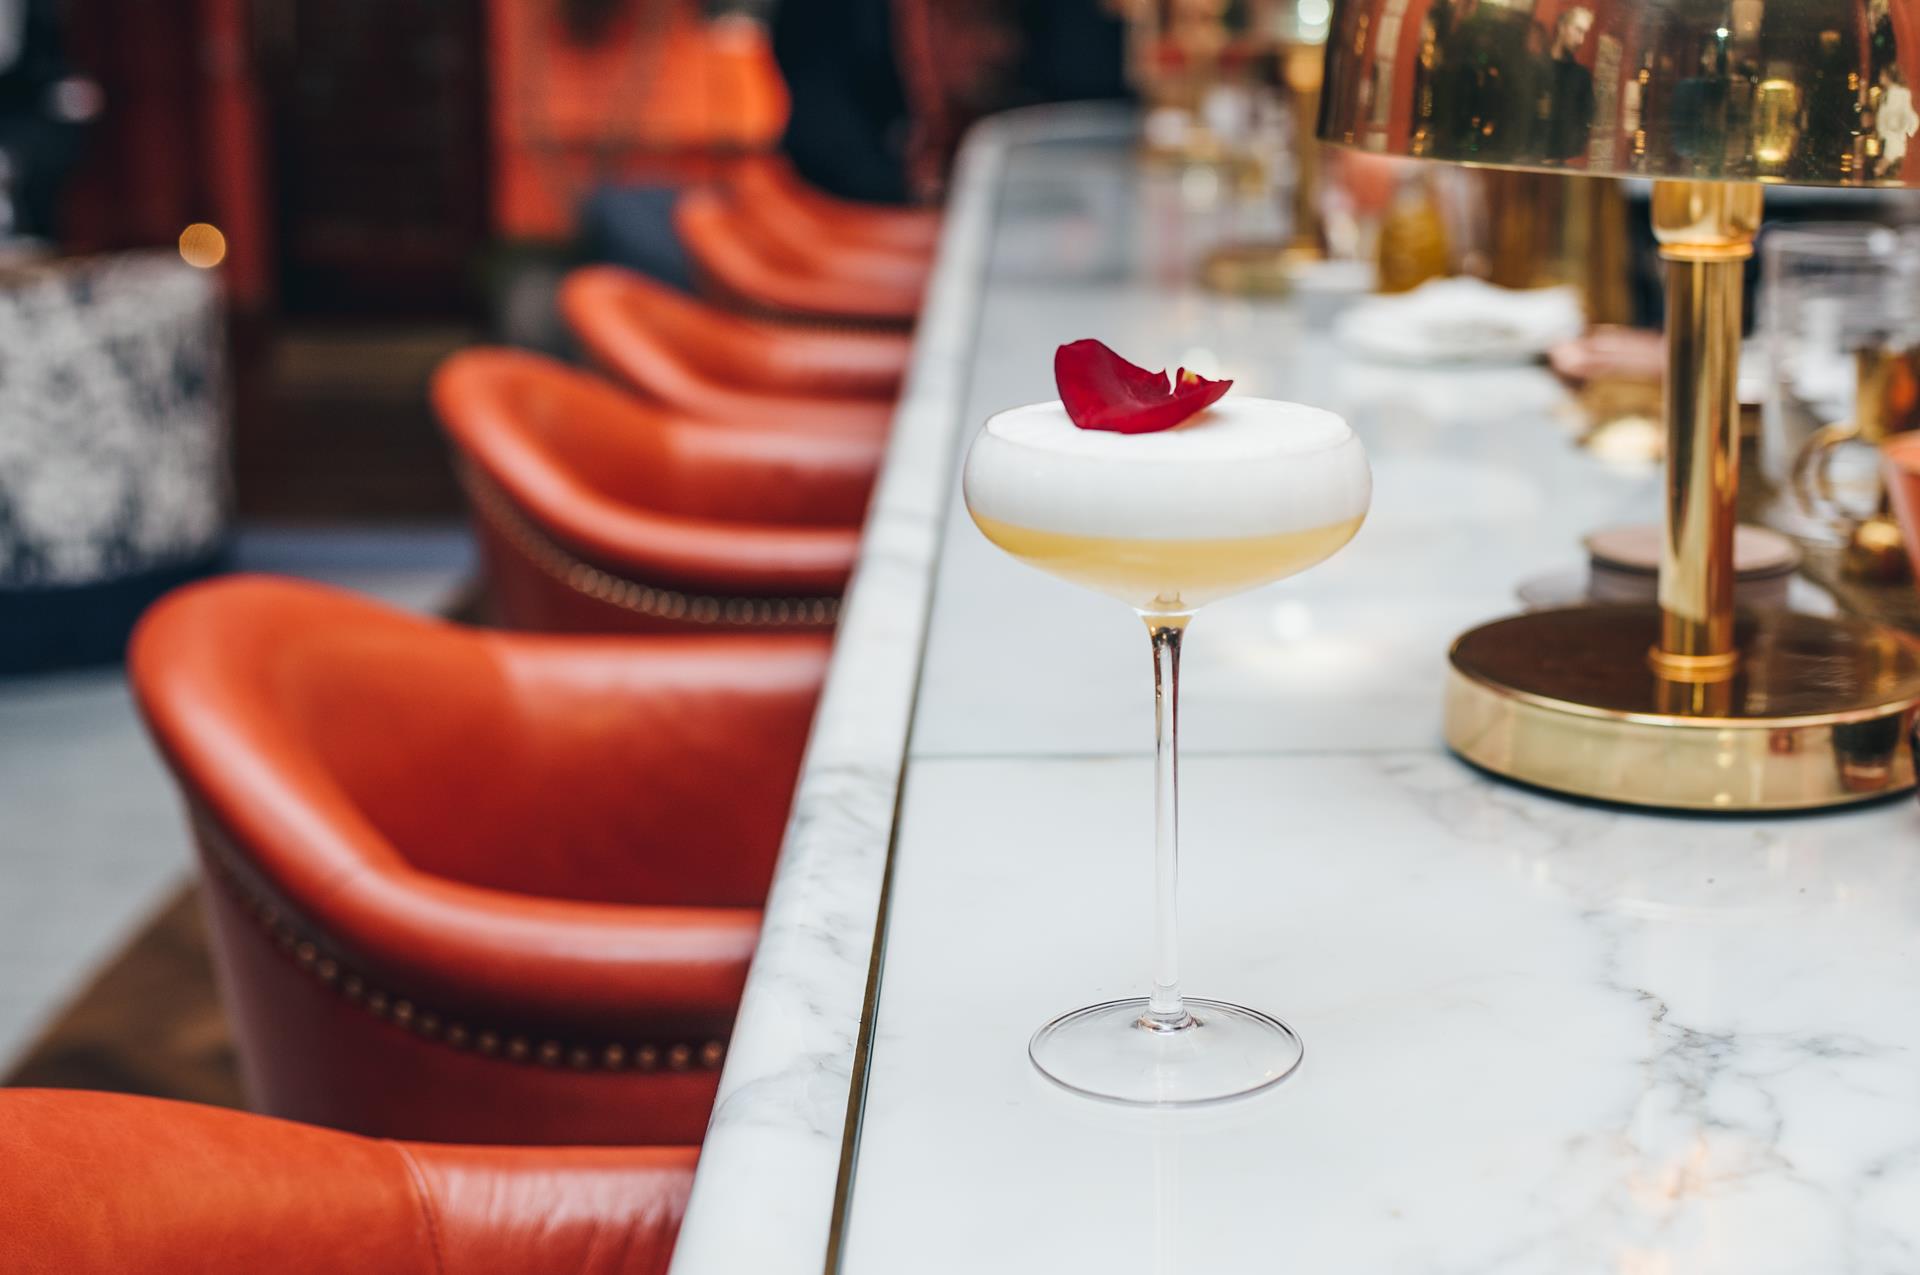 The Coral Room offers delicious non-alcoholic cocktails using Seedlip